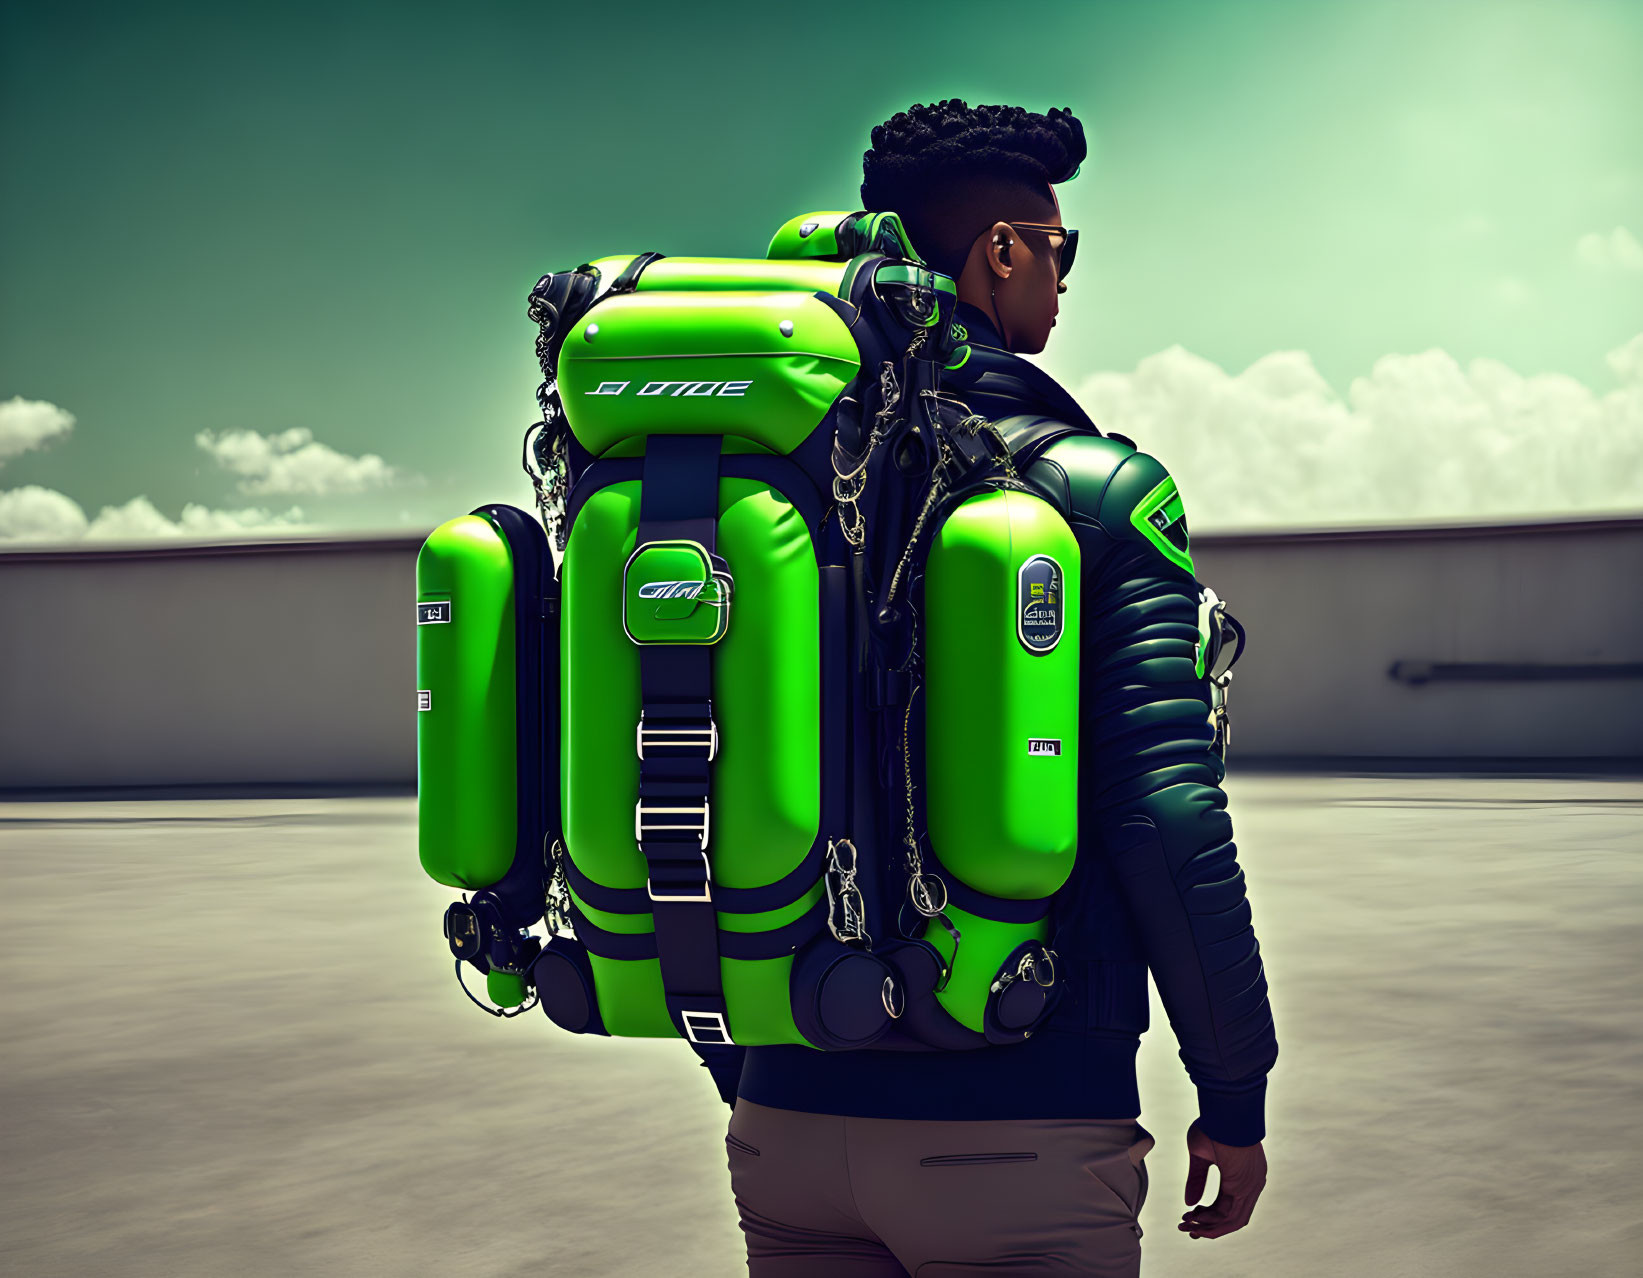 Cool green jet pack